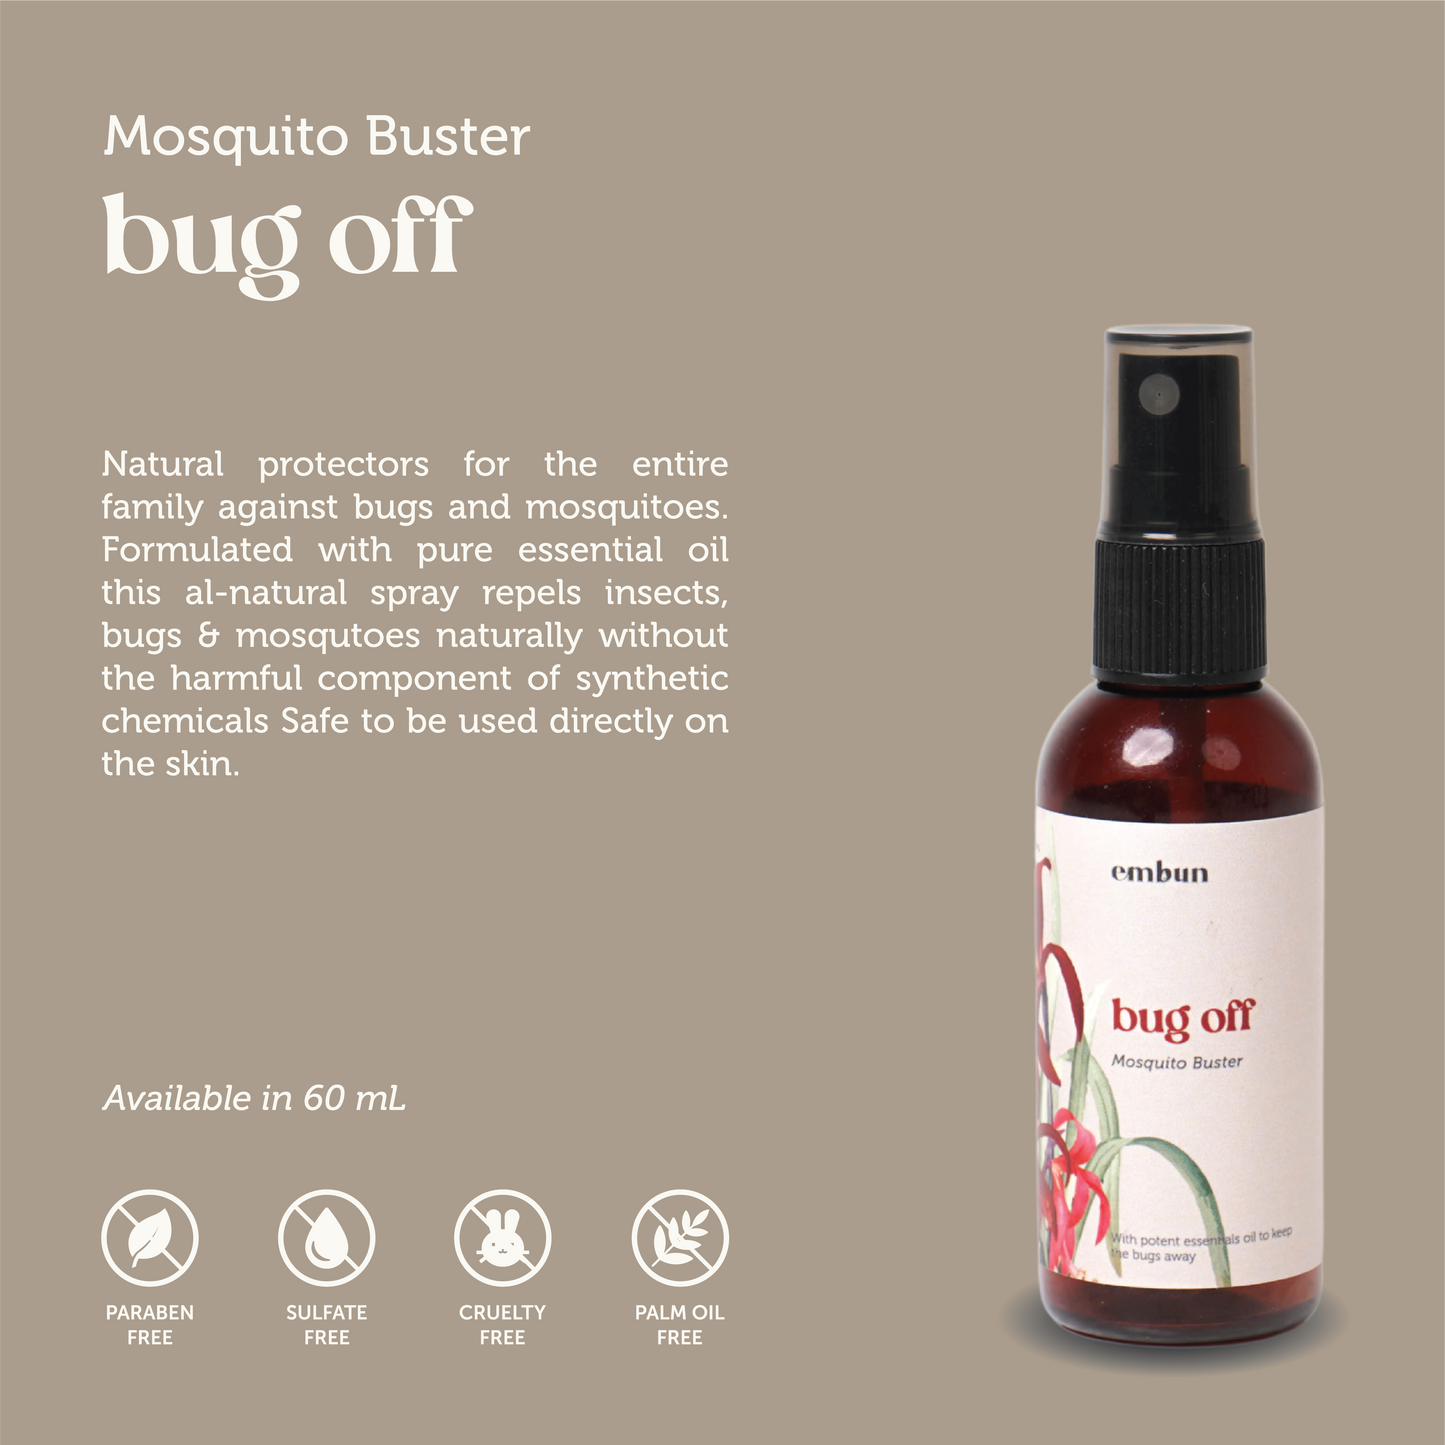 Mosquito Buster Bug Off 60 ml